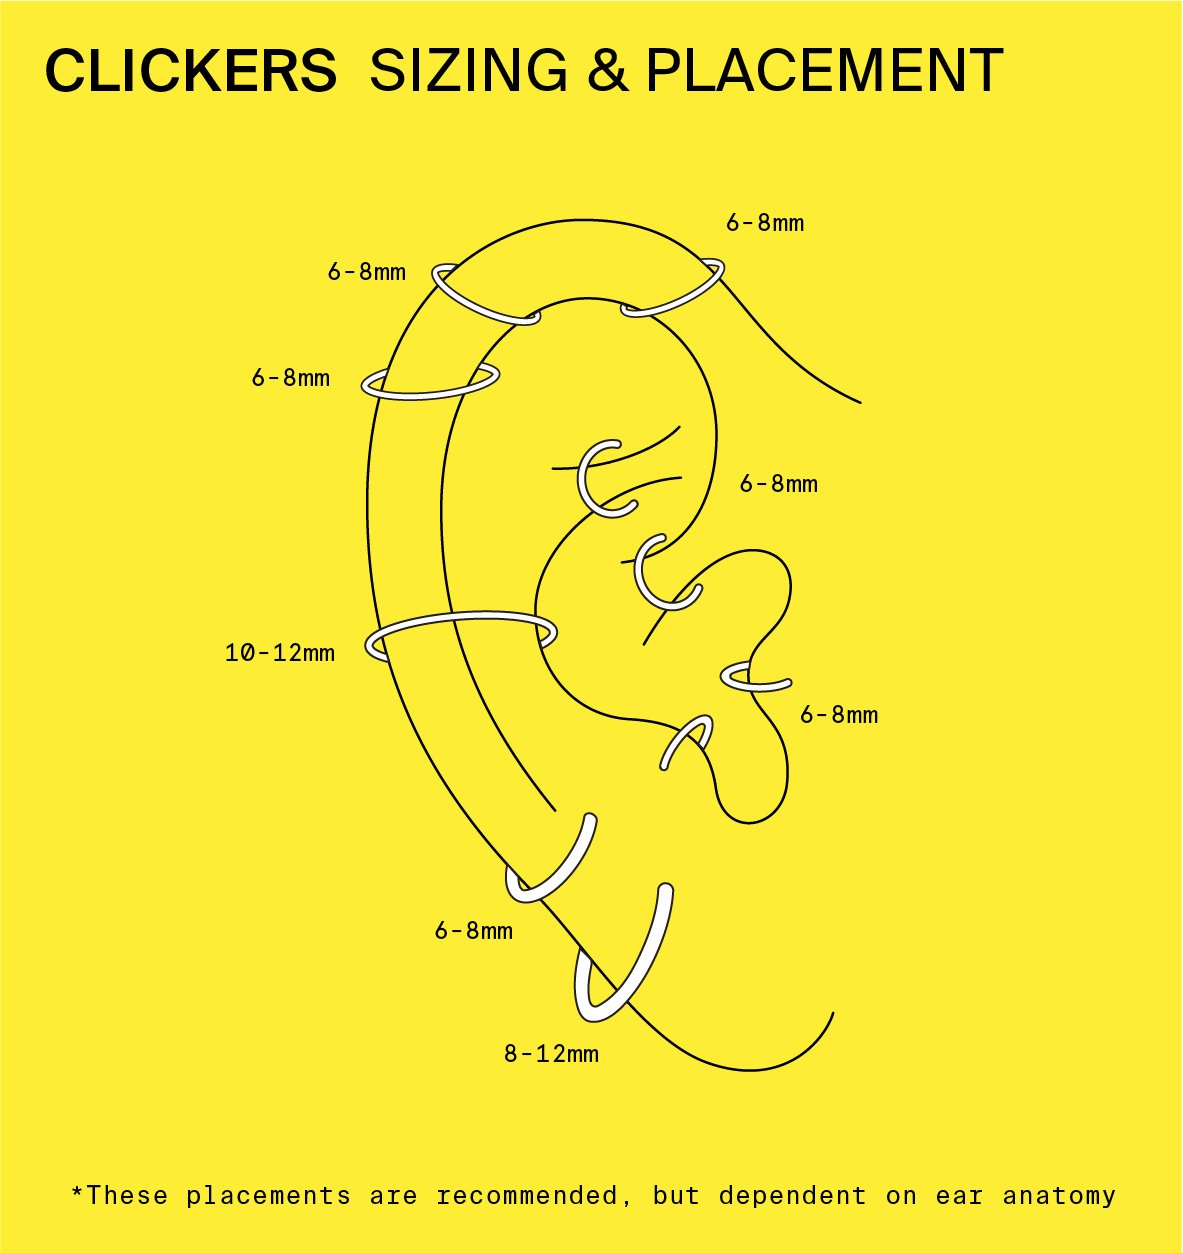 Clickers sizing and placement diagram